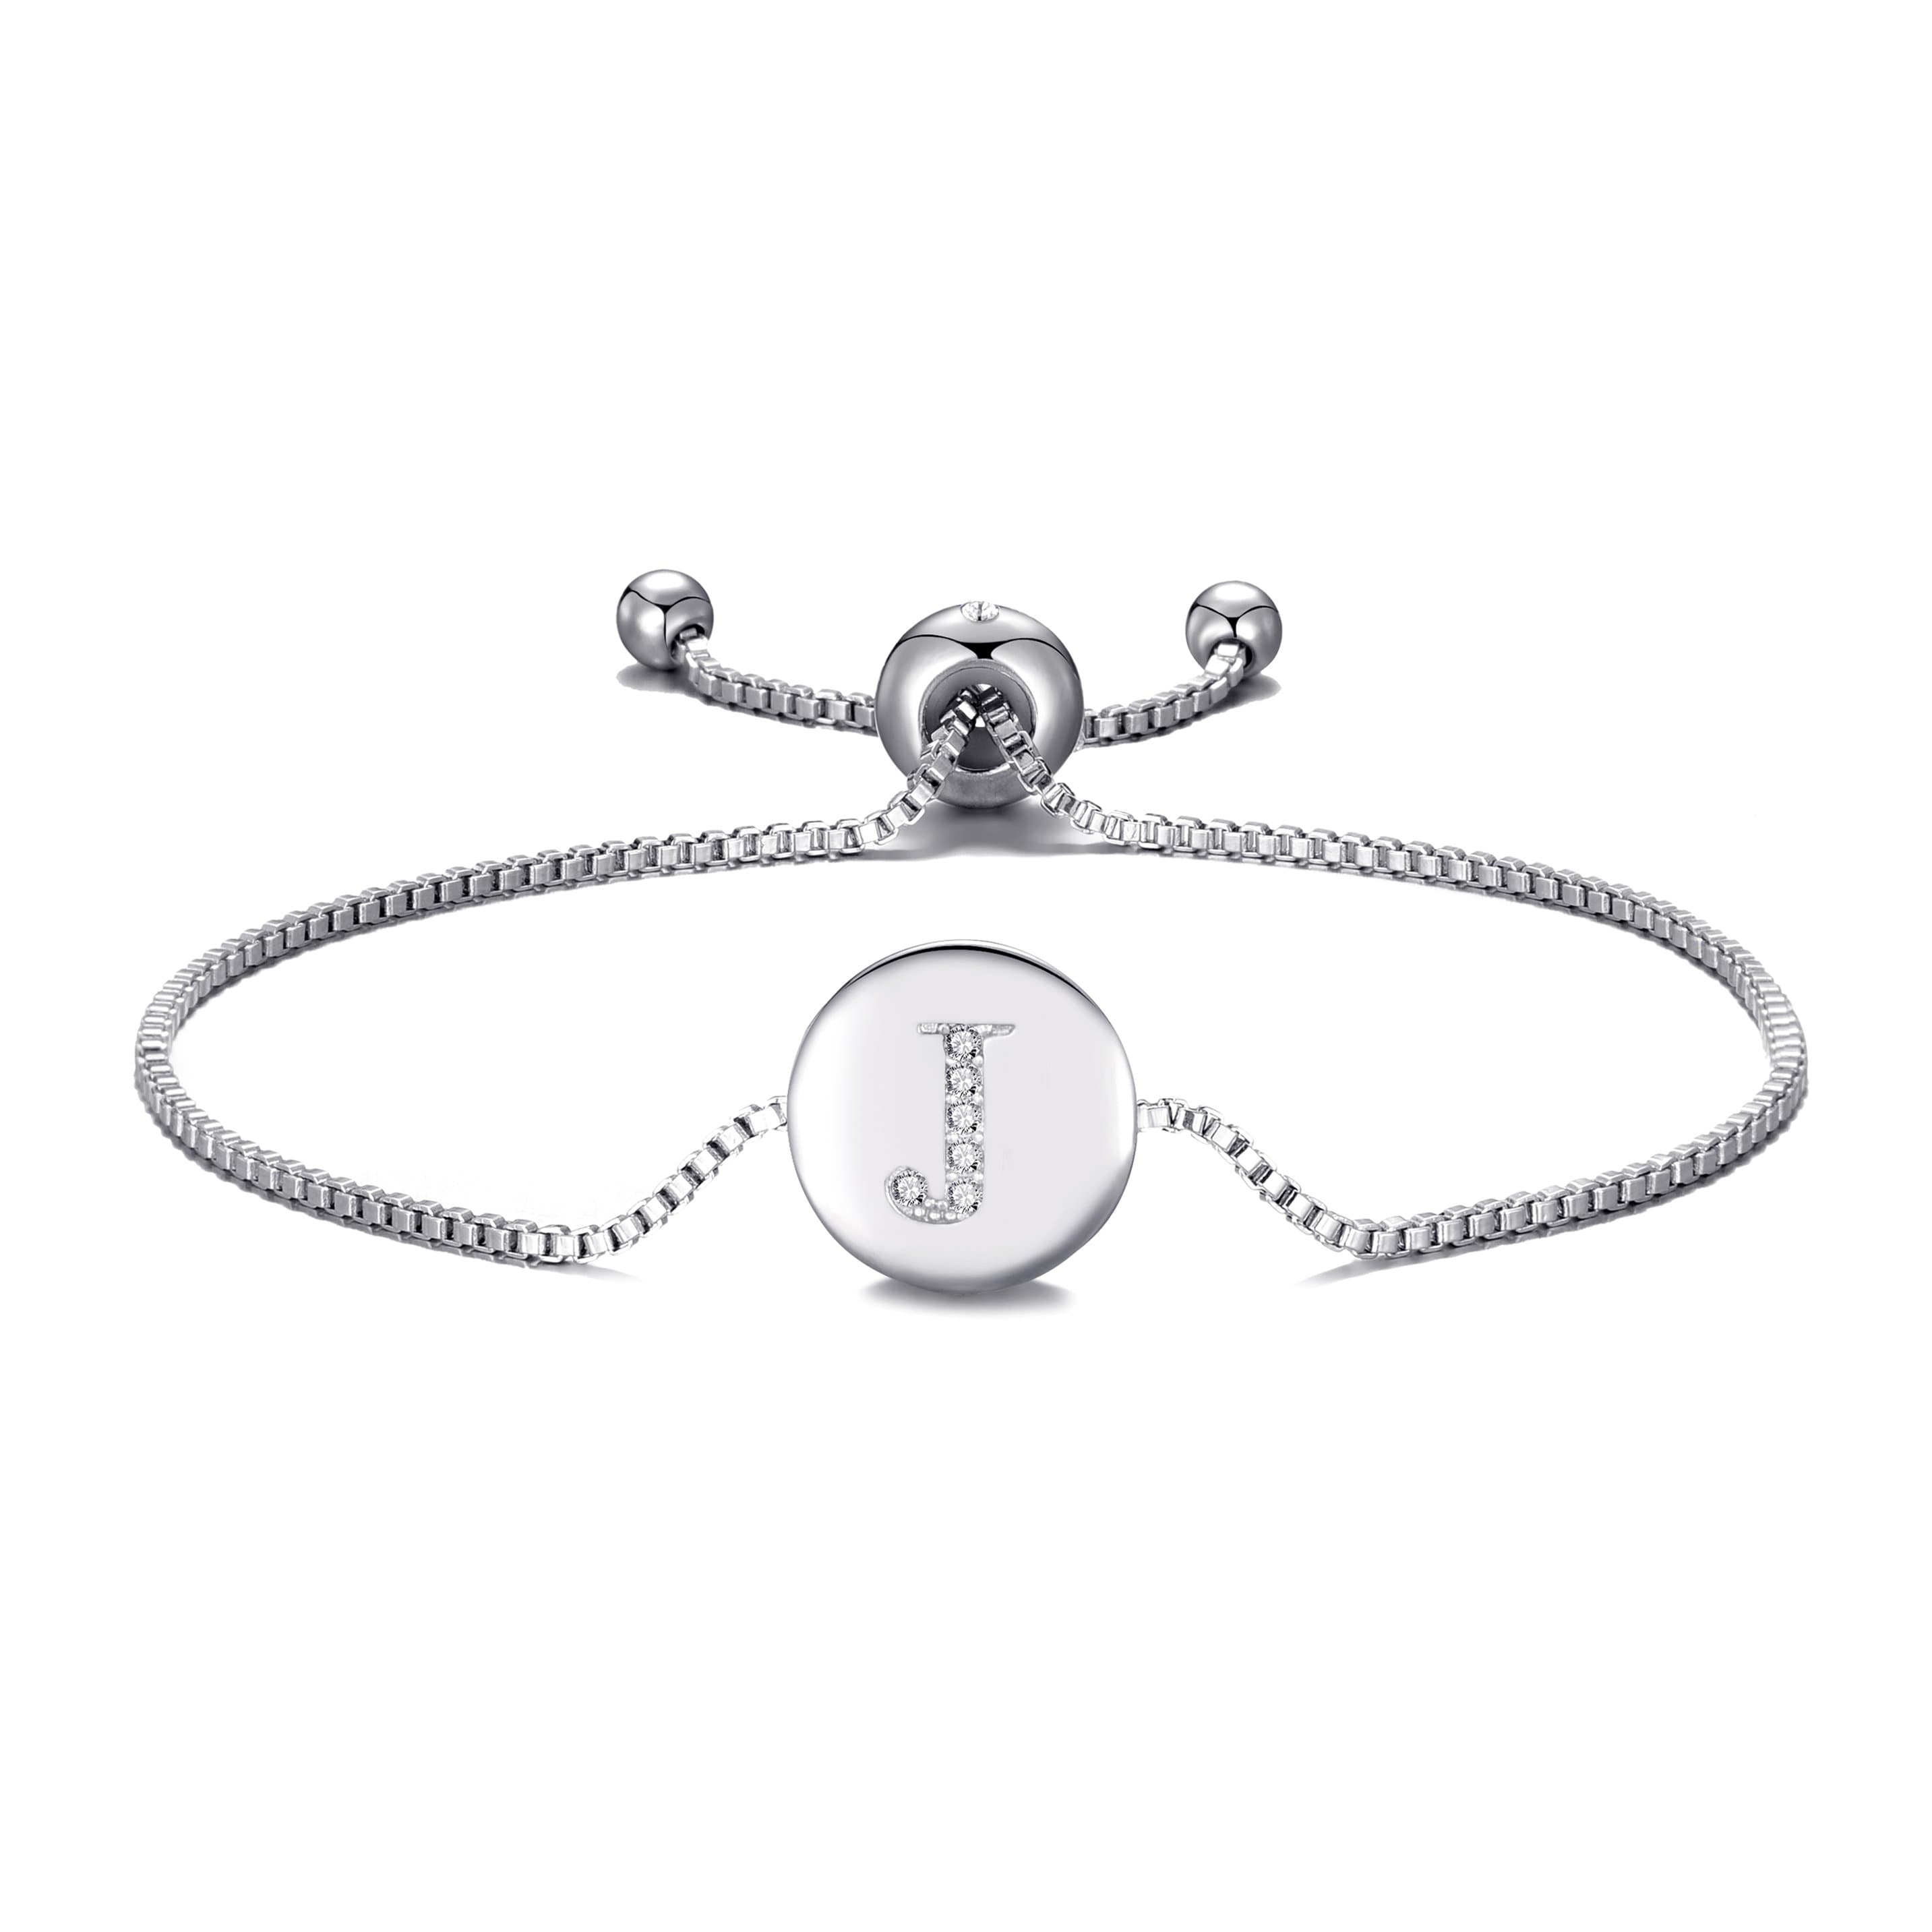 Initial Friendship Bracelet Letter J Created with Zircondia® Crystals by Philip Jones Jewellery